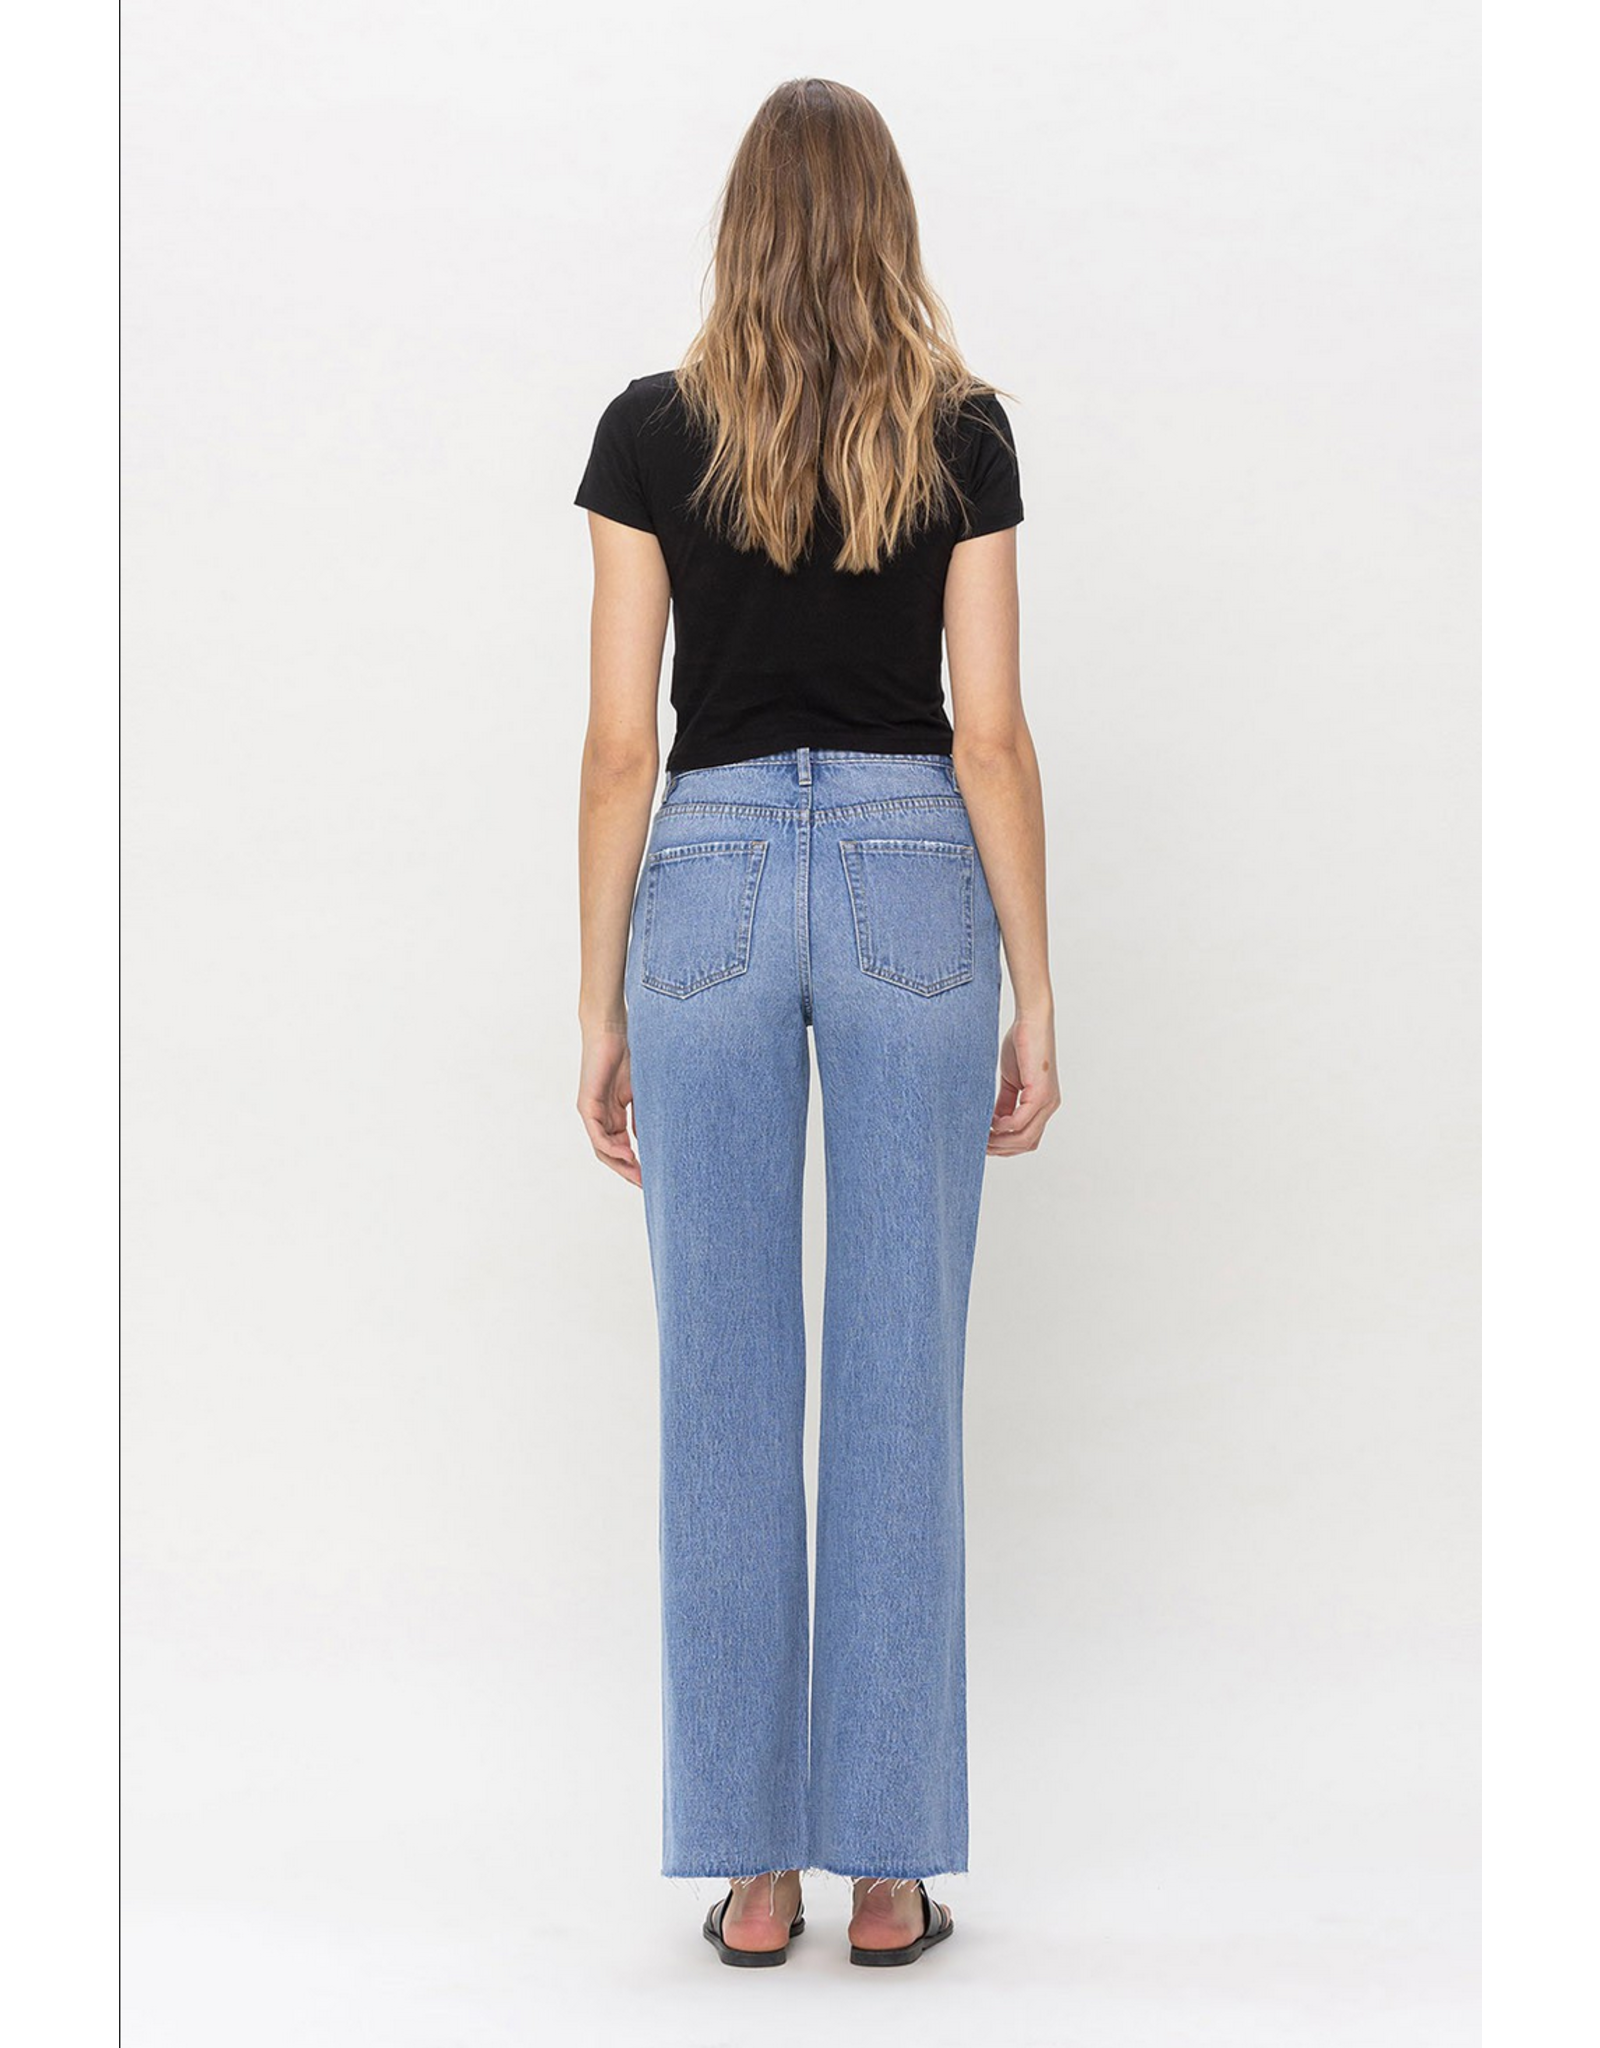 90's Super High Rise Loose Fit Jeans from Vervet by Flying Monkey - J Marcel